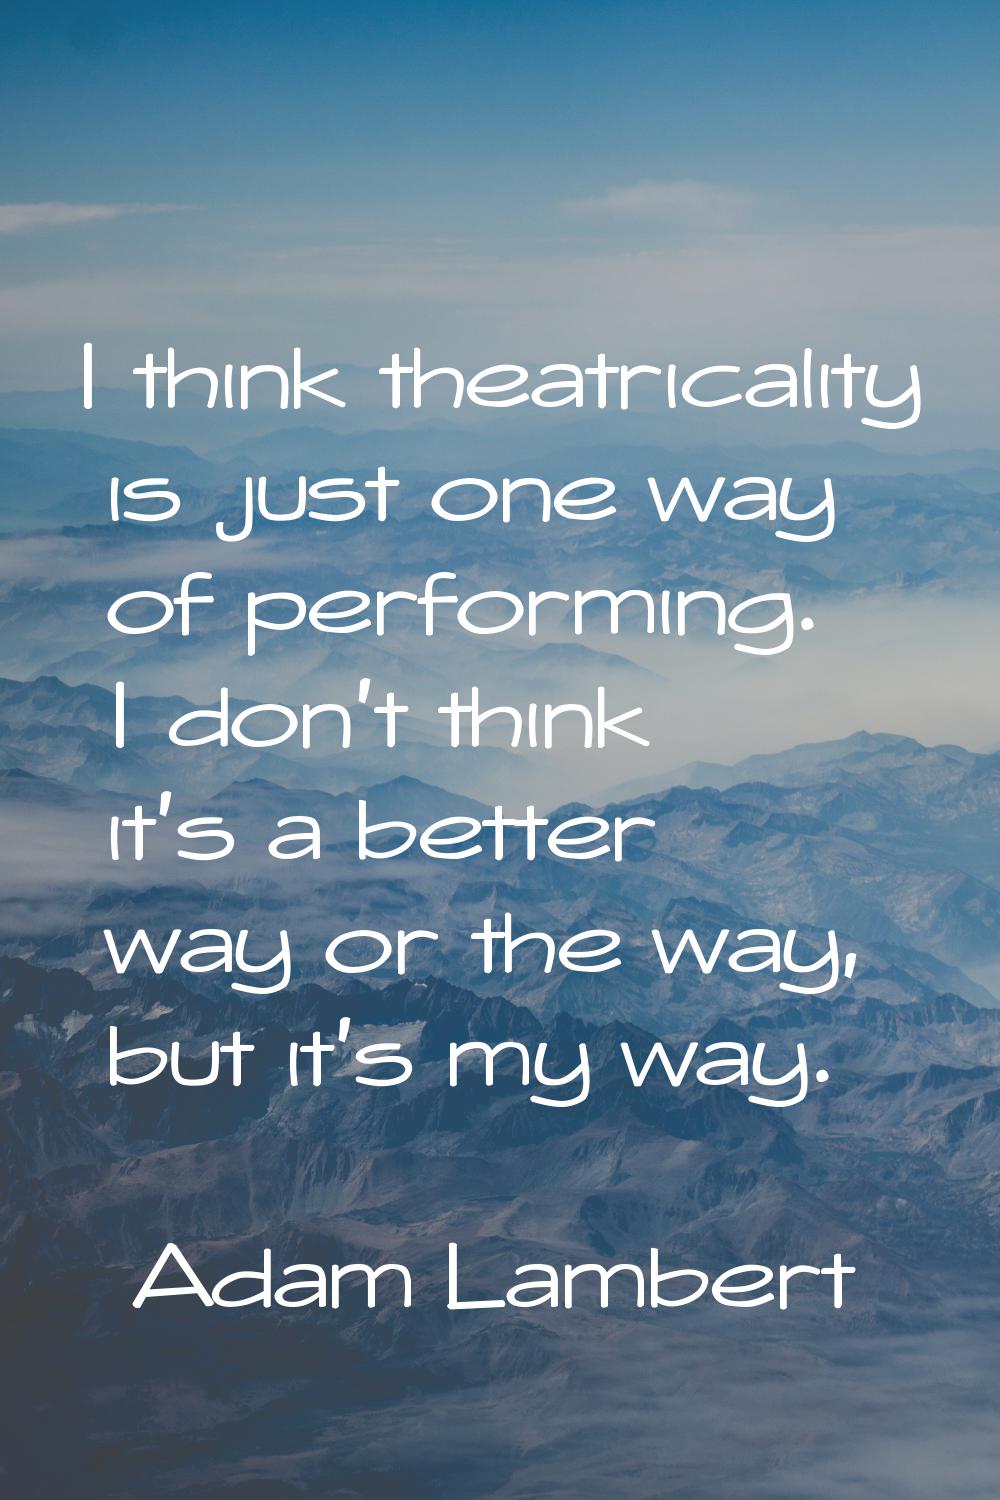 I think theatricality is just one way of performing. I don't think it's a better way or the way, bu